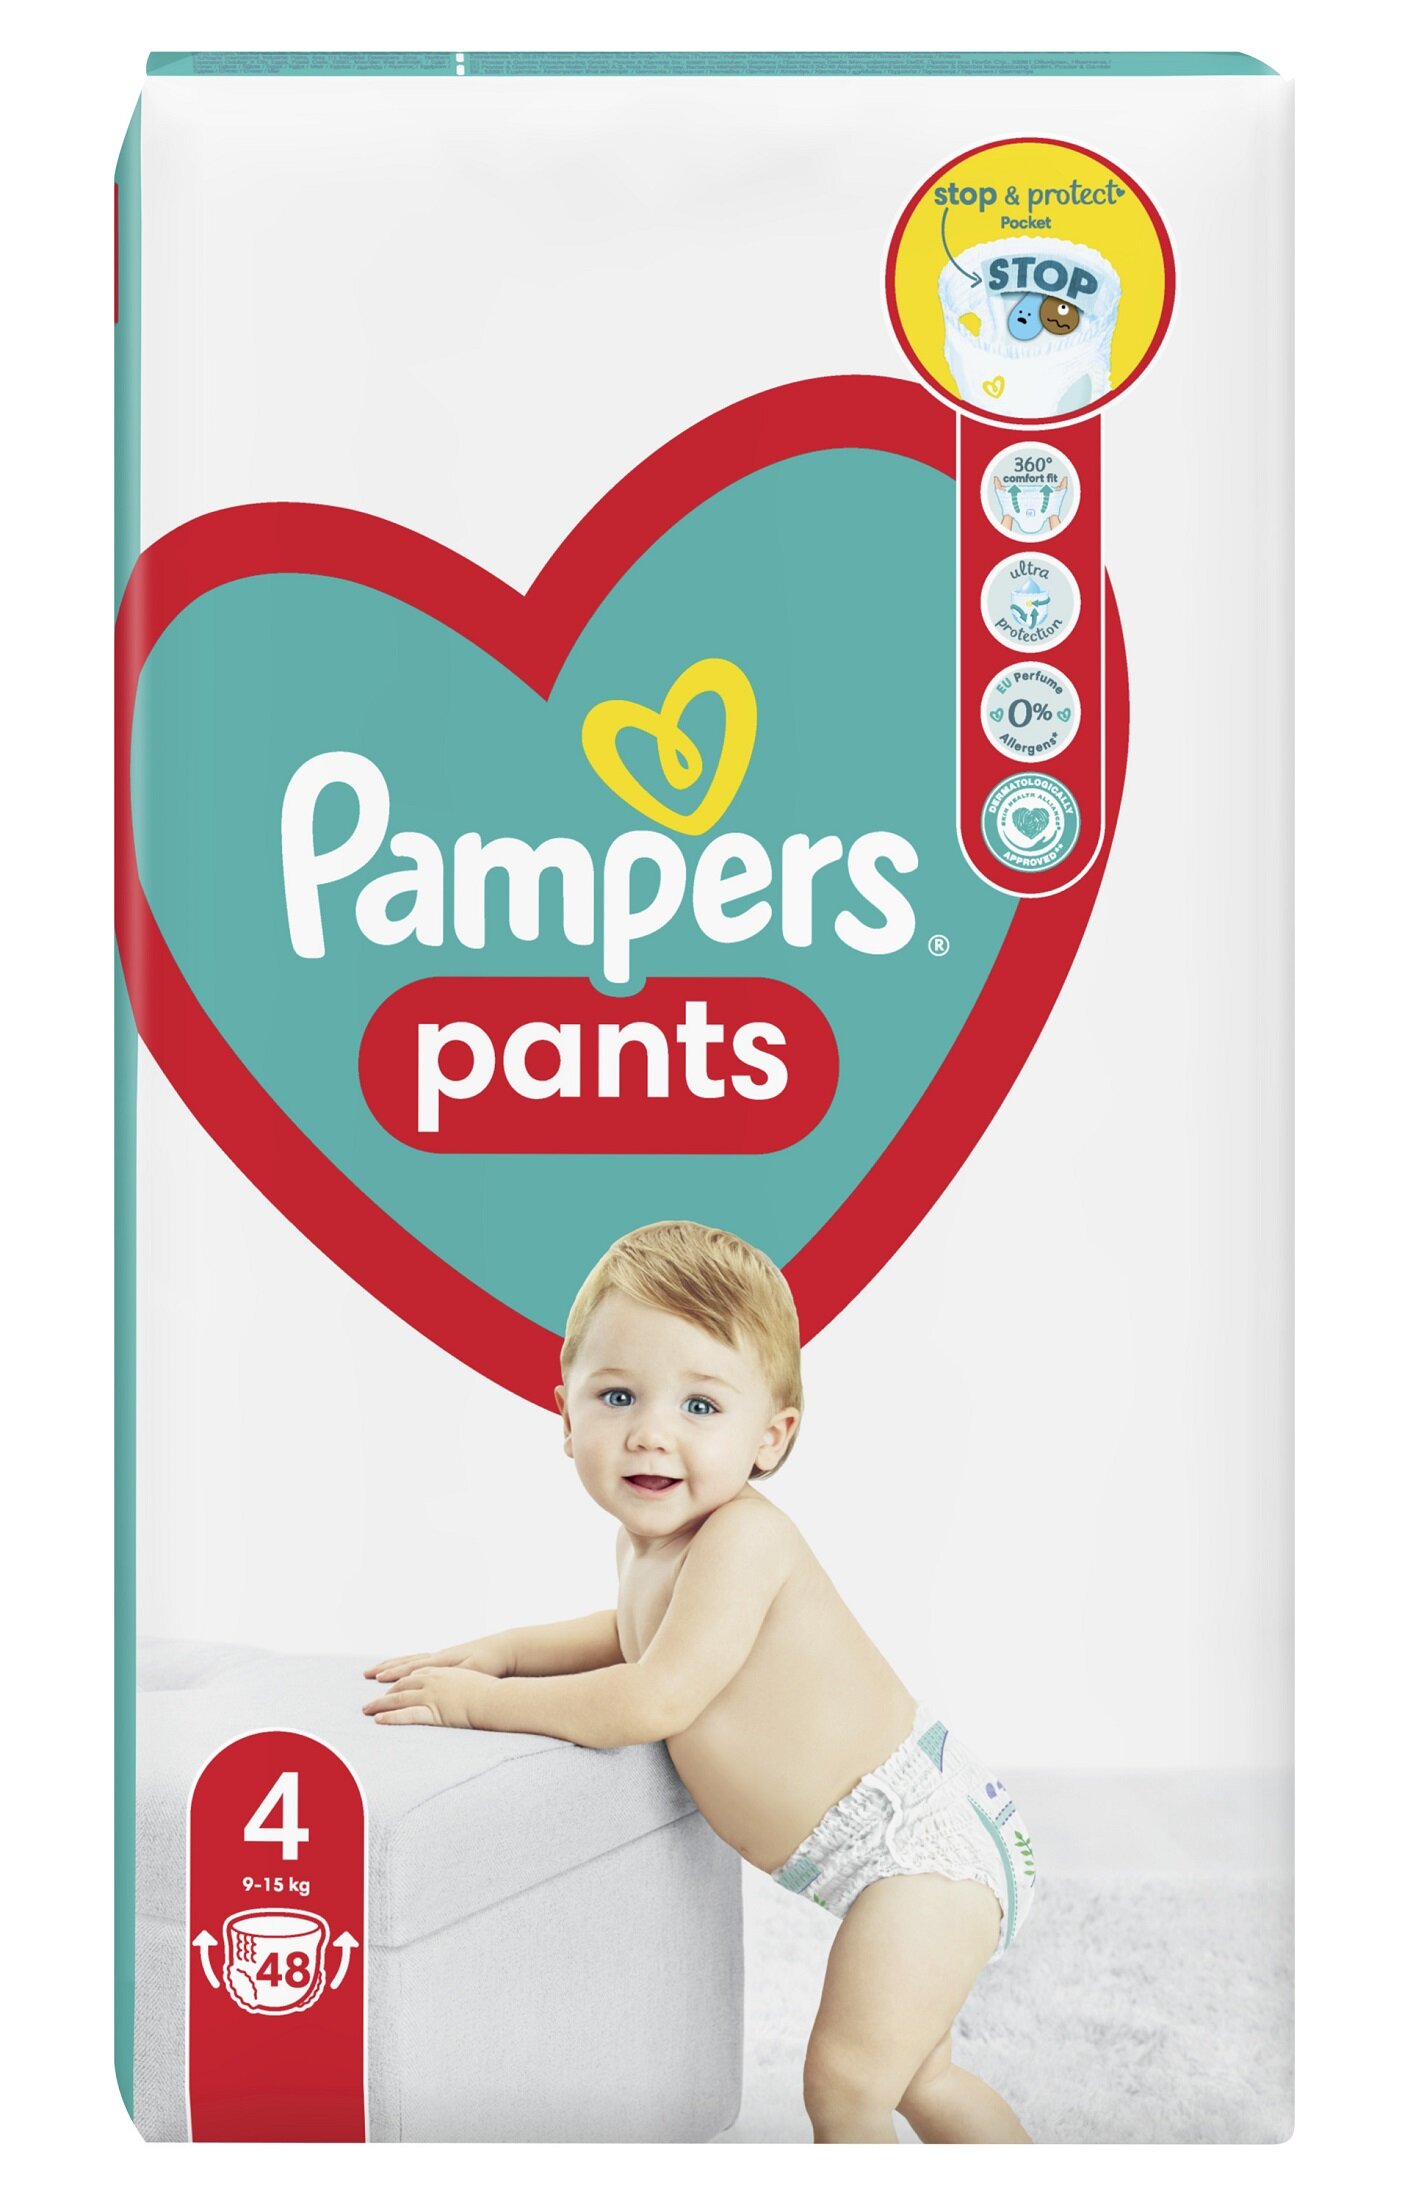 pampersy pampers 48